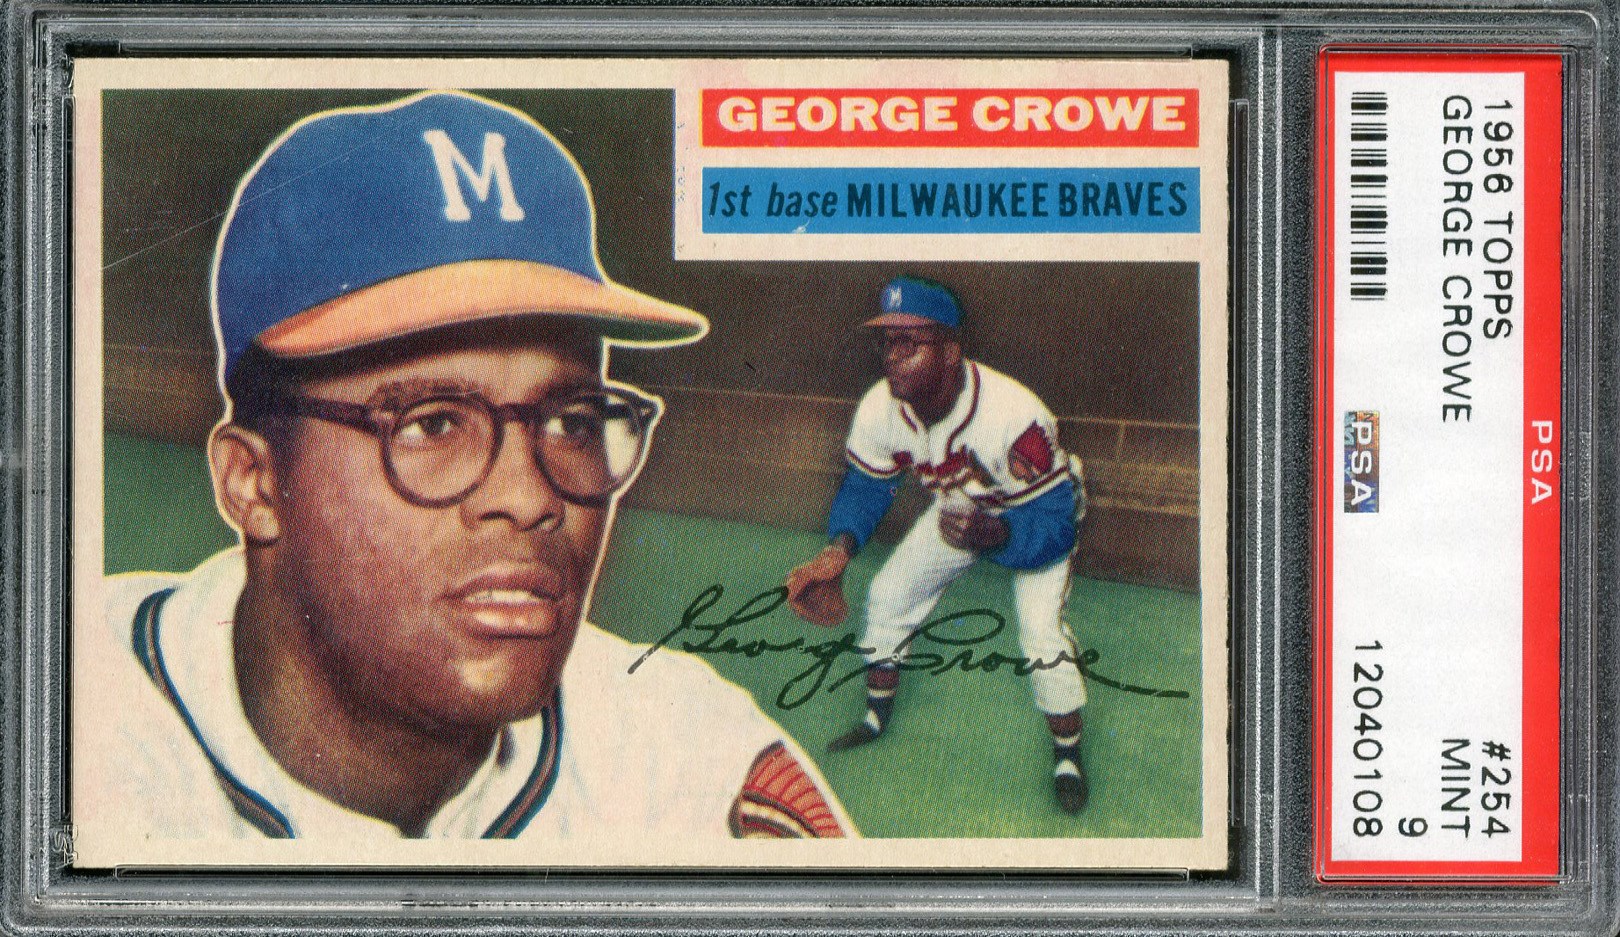 Baseball and Trading Cards - 1956 Topps #254 George Crowe PSA MINT 9